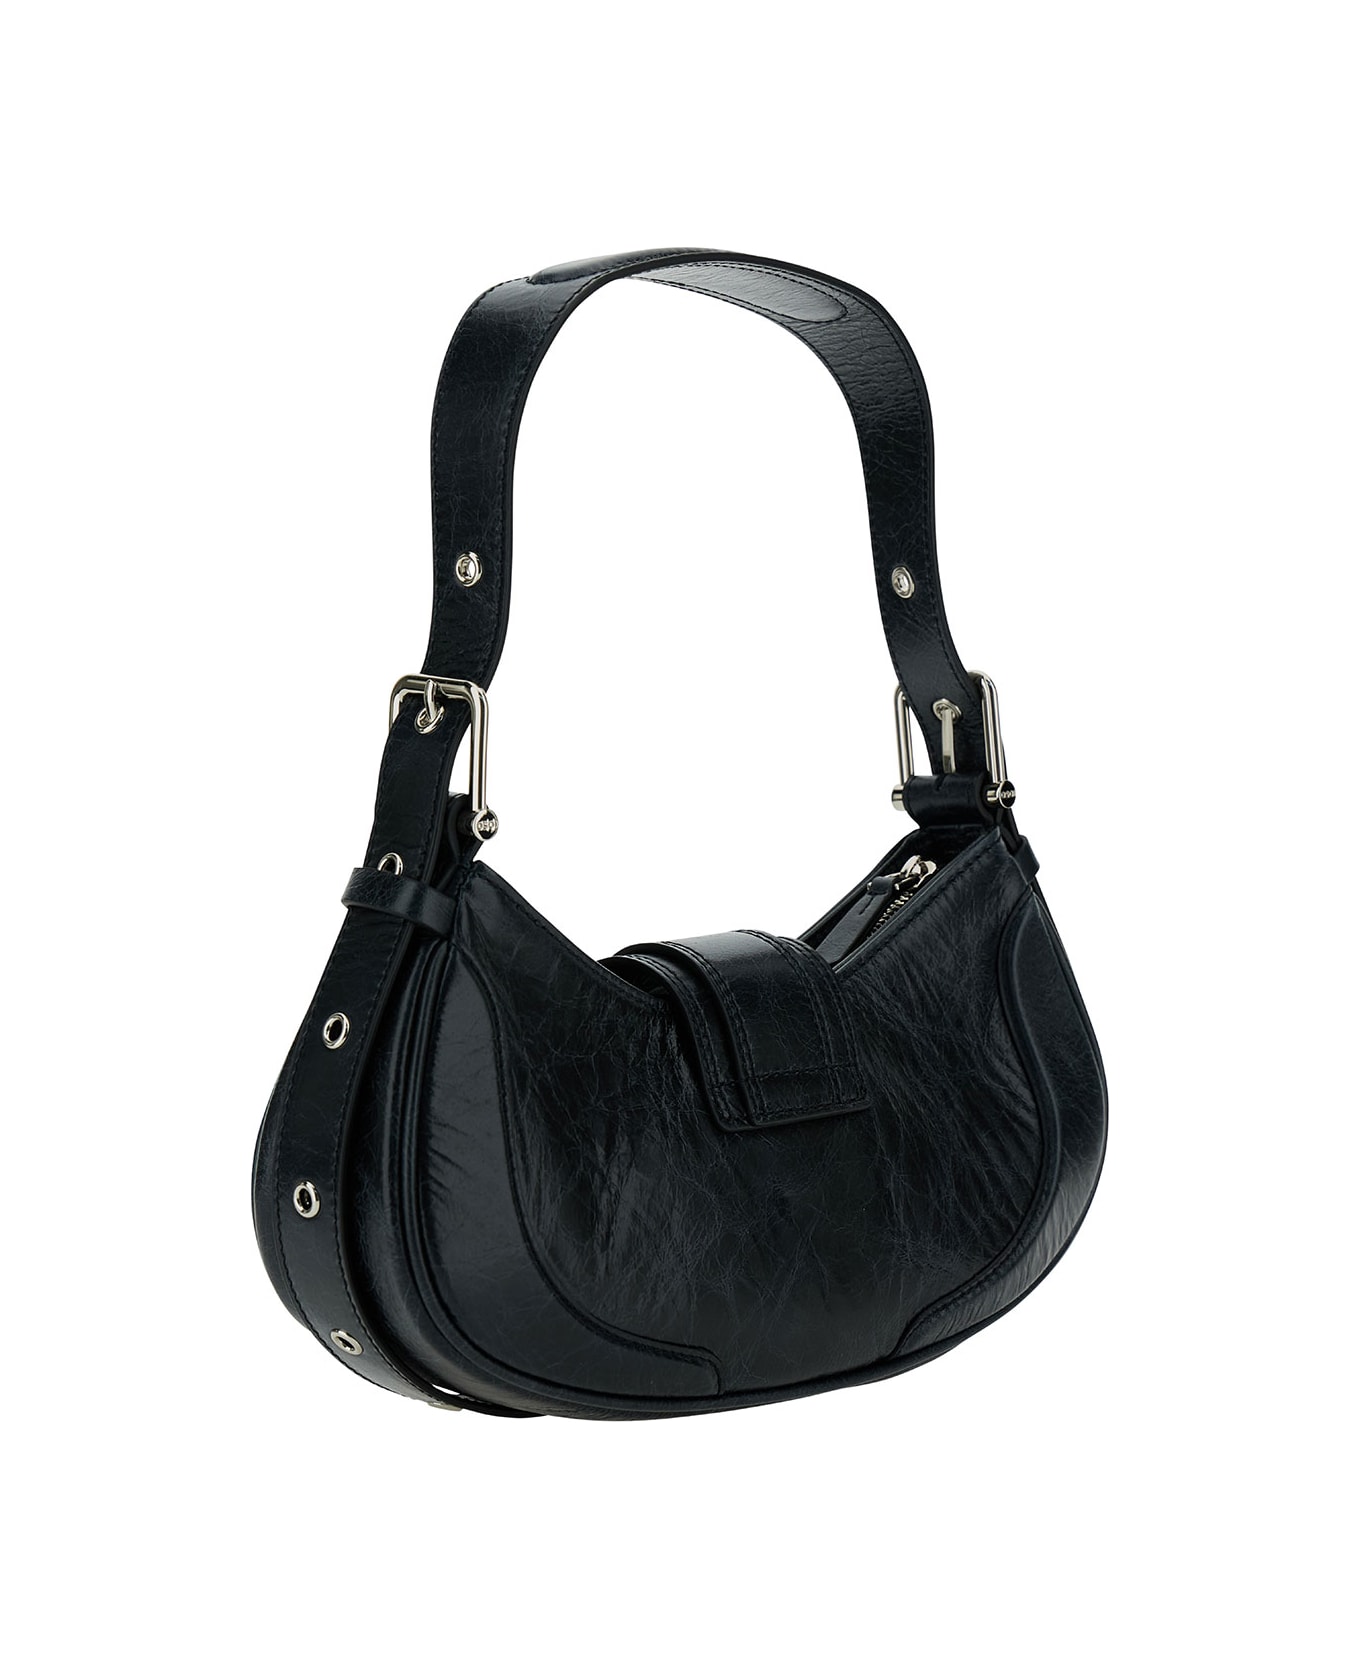 OSOI 'small Brocle' Black Shoulder Bag In Hammered Leather Woman - Black